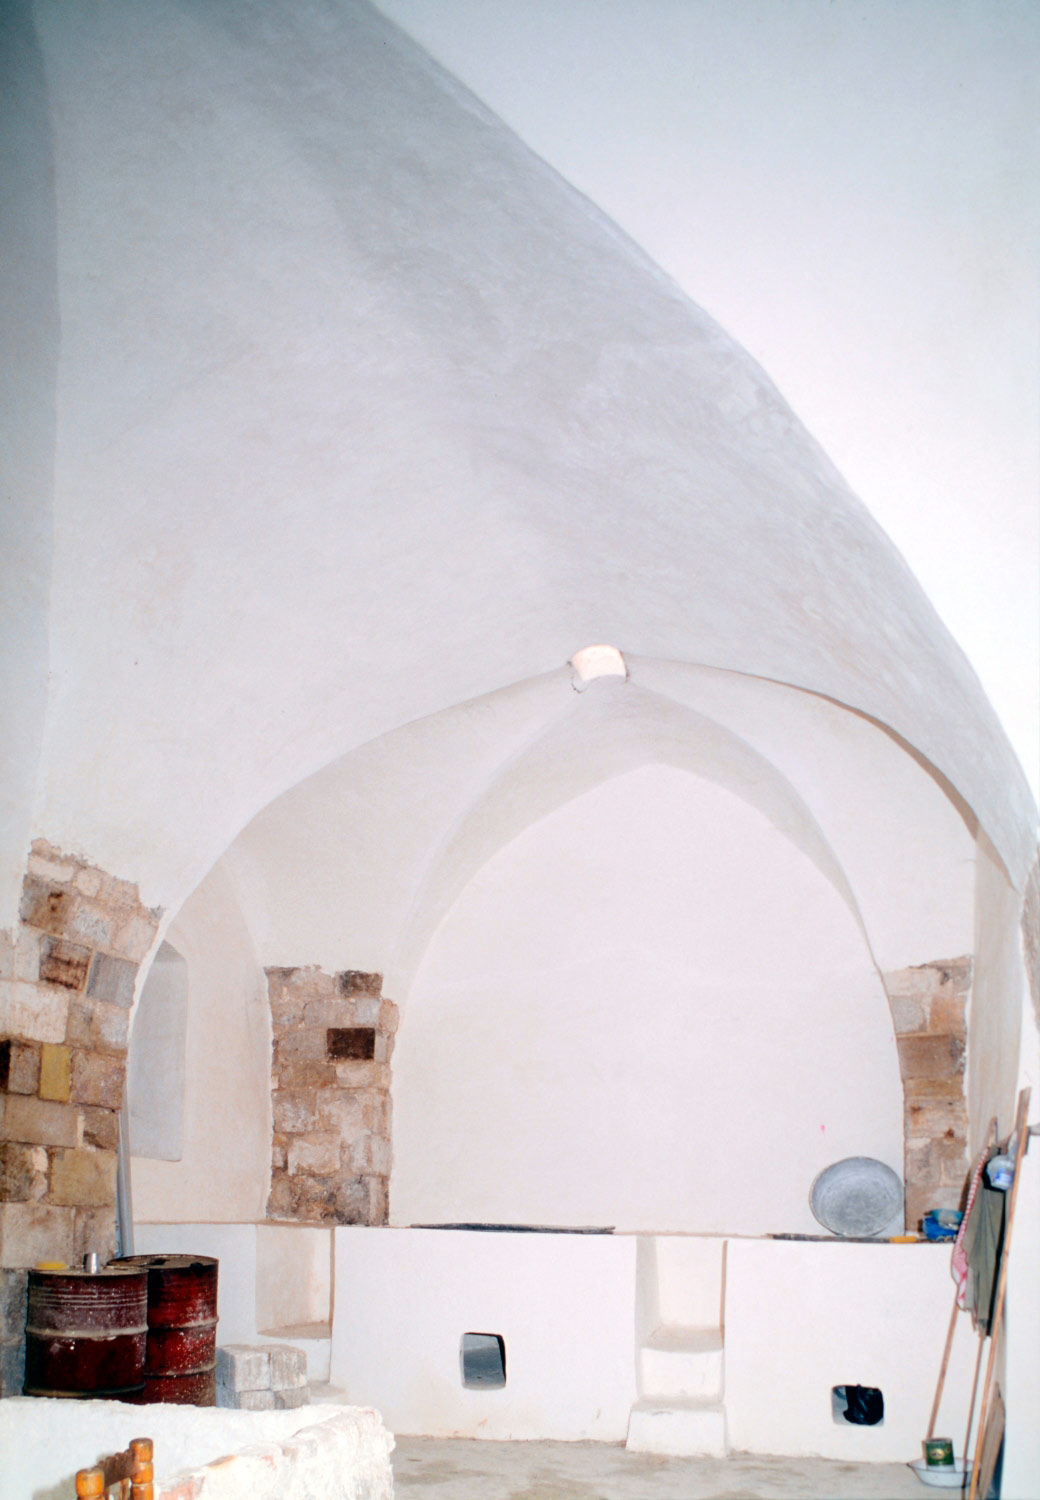 Interior view of a vaulted chamber